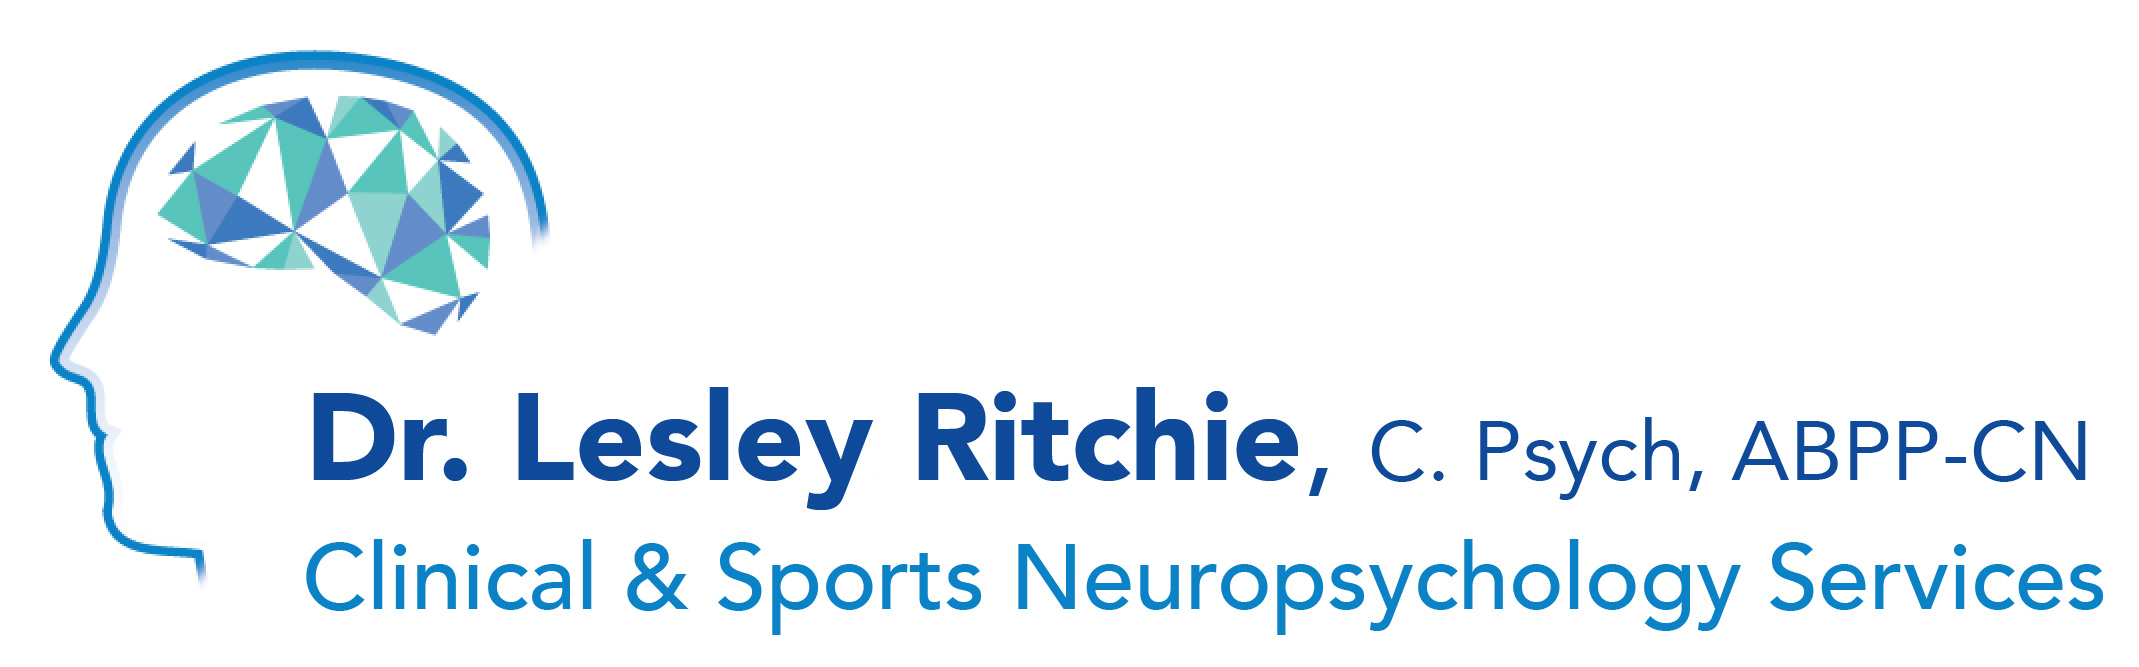 Dr. Lesley Ritchie | Clinical Sports and Neuropsychology Services